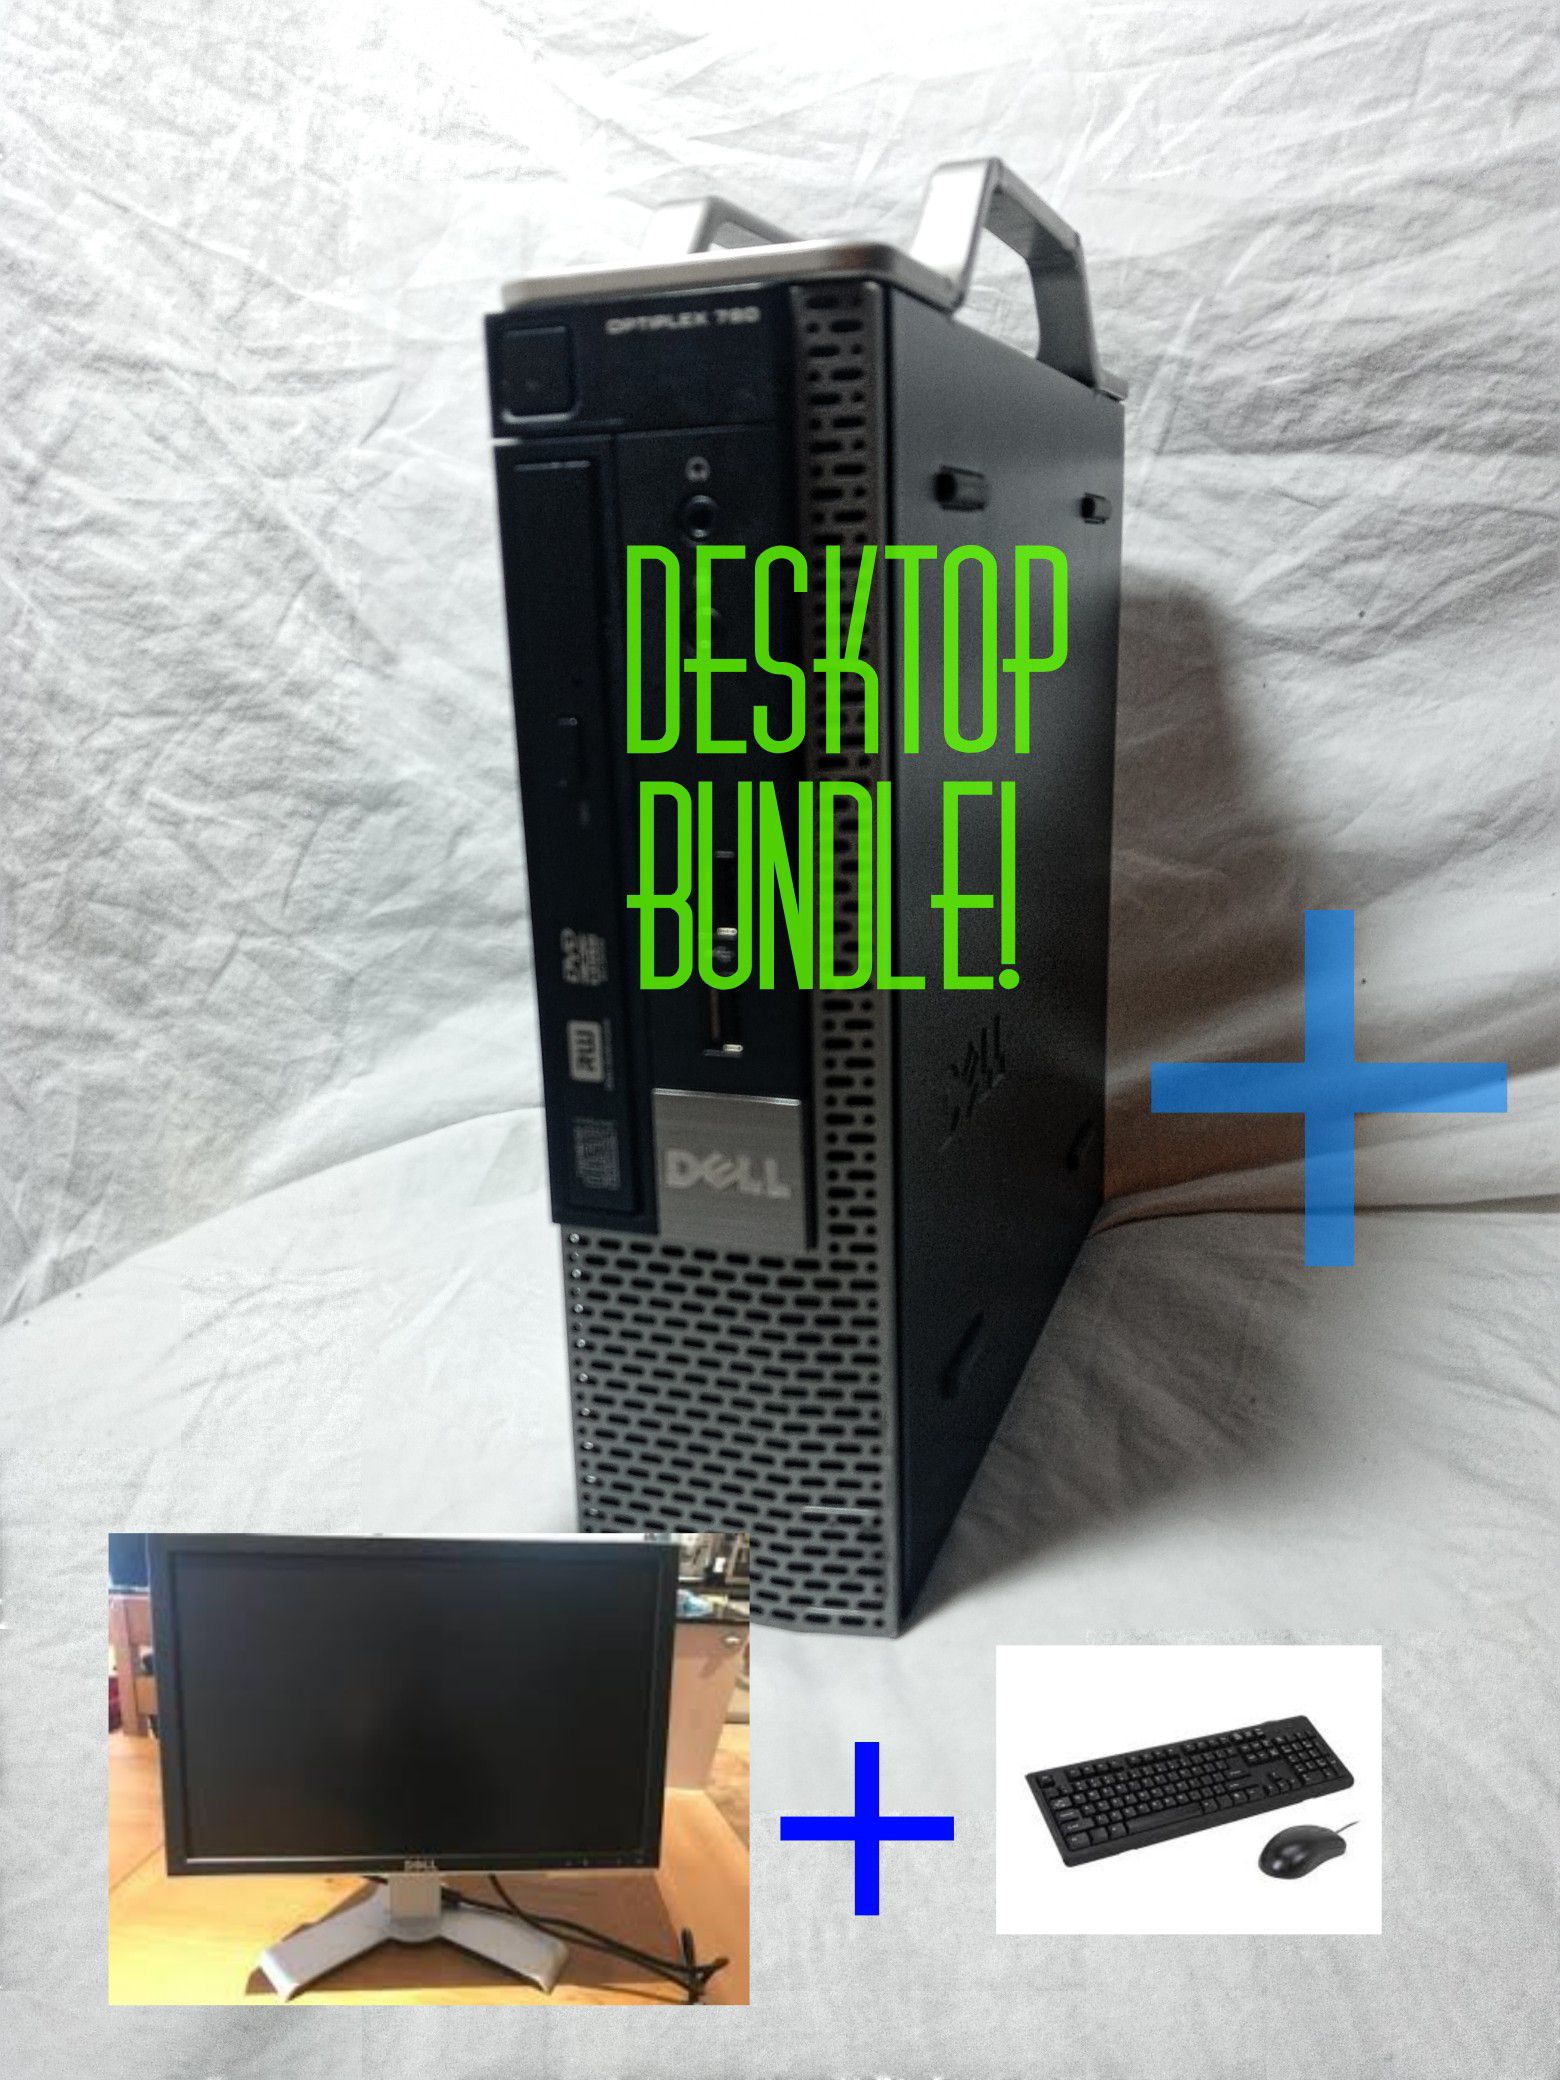 Refurbished Dell Optiplex 780 Ultra Small Form Factor (USFF) Desktop PC with Monitor!